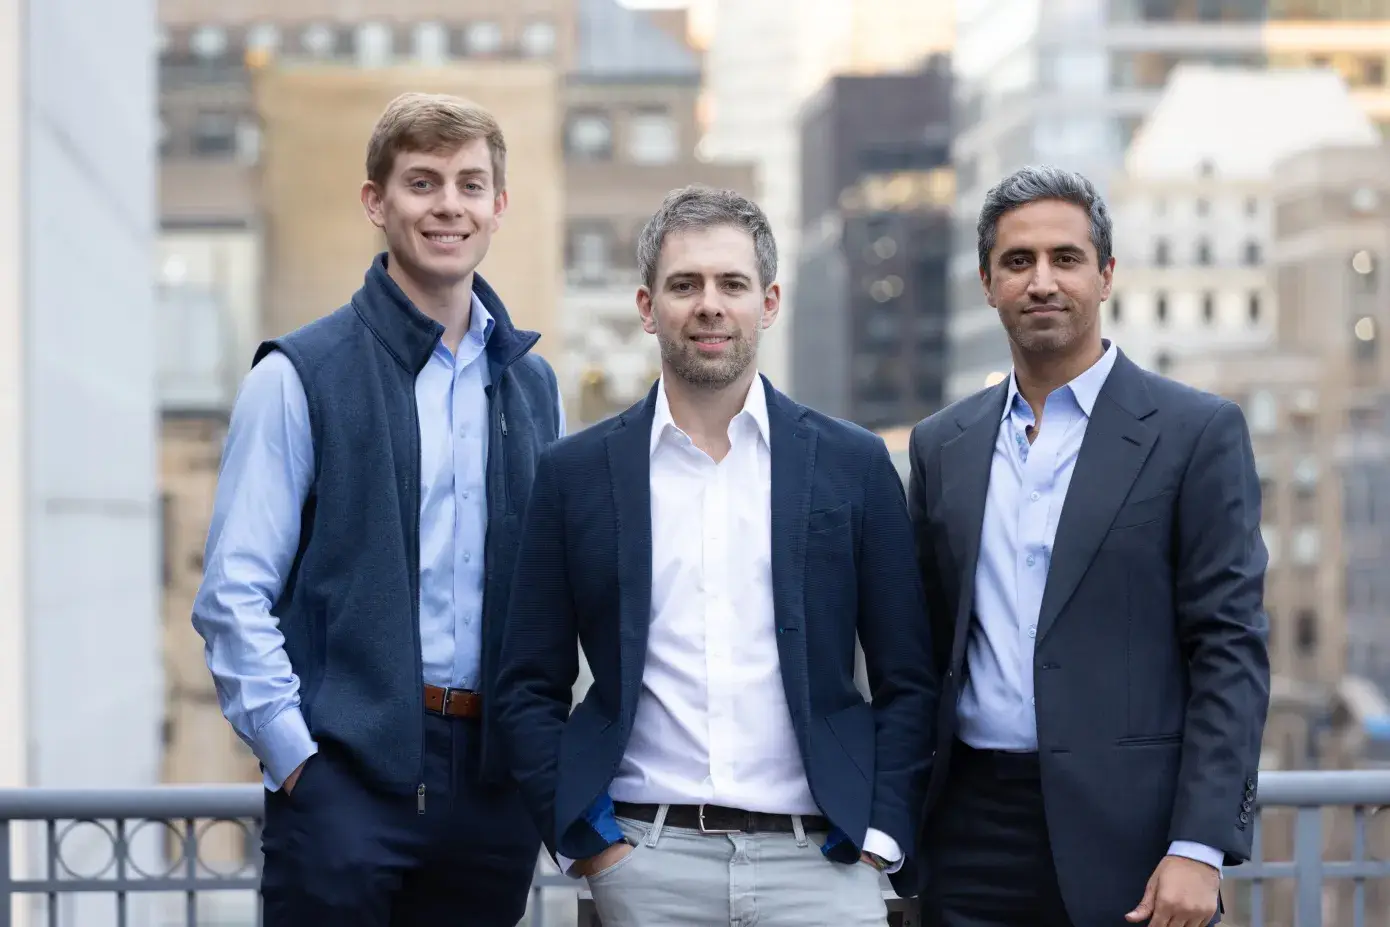 Keychain, a Consumer Packaged Goods Manufacturing Platform secures $18 Million in Funding